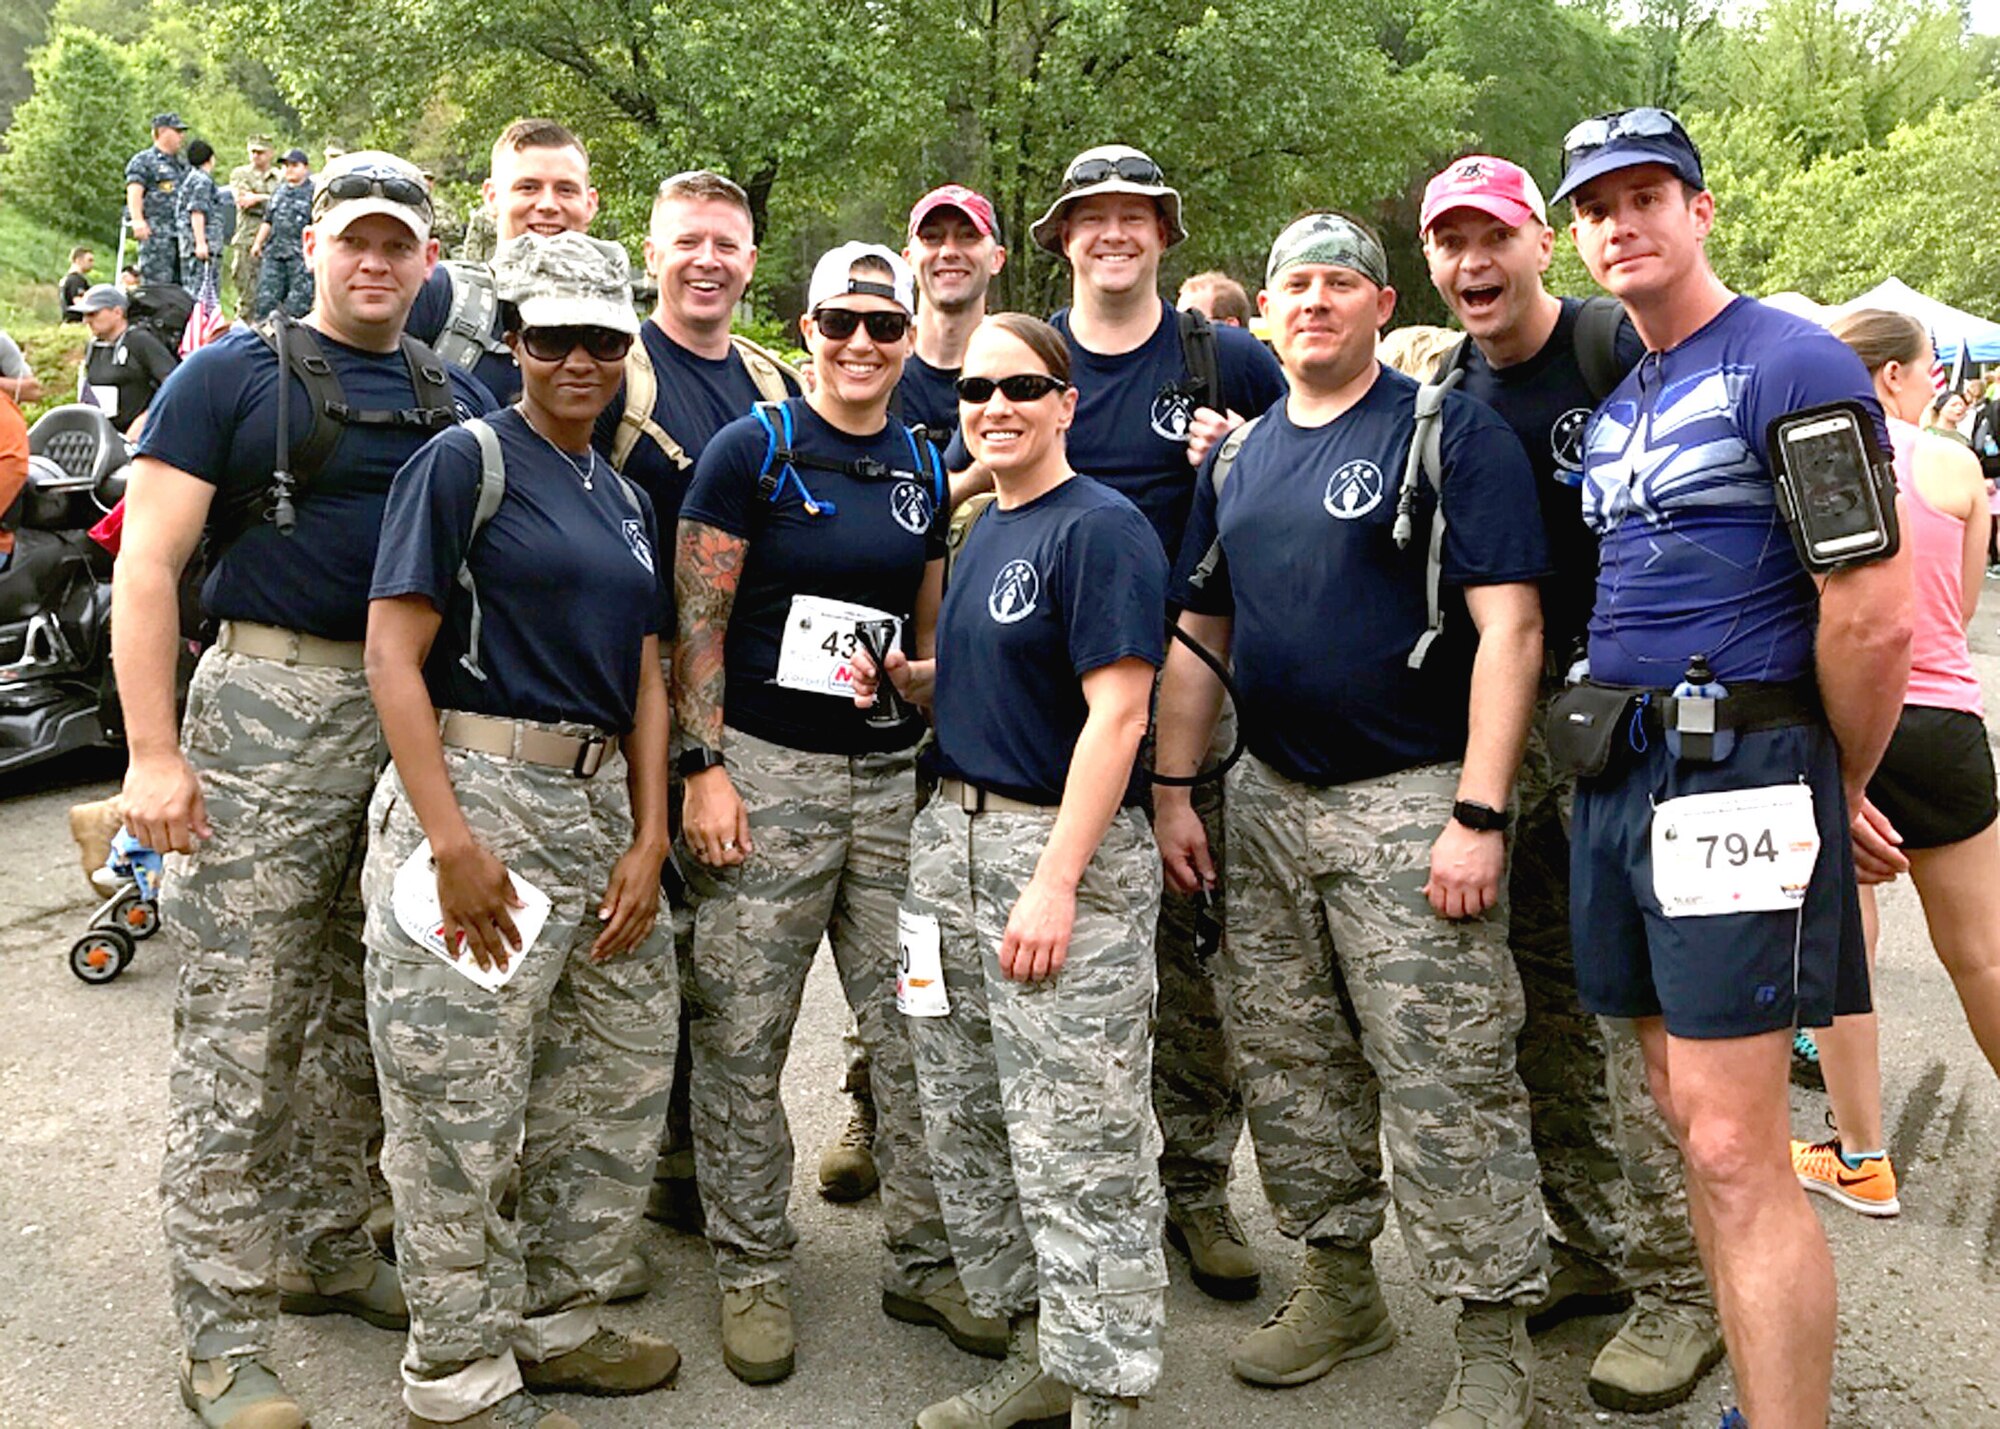 Eleven Airmen assigned with I.G. Brown Training and Education Center made their way 13.1 miles through Gatlinburg and into Tennessee’s Smoky Mountains April 22 to complete the 10th Mountain Man Memorial March. Team TEC finished 2nd and Team AFSA finished 3rd in the military team light 13.1 division. One sergeant, who ran the half marathon, finished sixth overall. The annual 26.2, 13.1 and 10K run/march/ruck has since grown to be among the largest Gold Star Family events east of the Mississippi. (U.S Air National Guard photo courtesy Chief Master Sergeant Paul H. Lankford EPME Center)